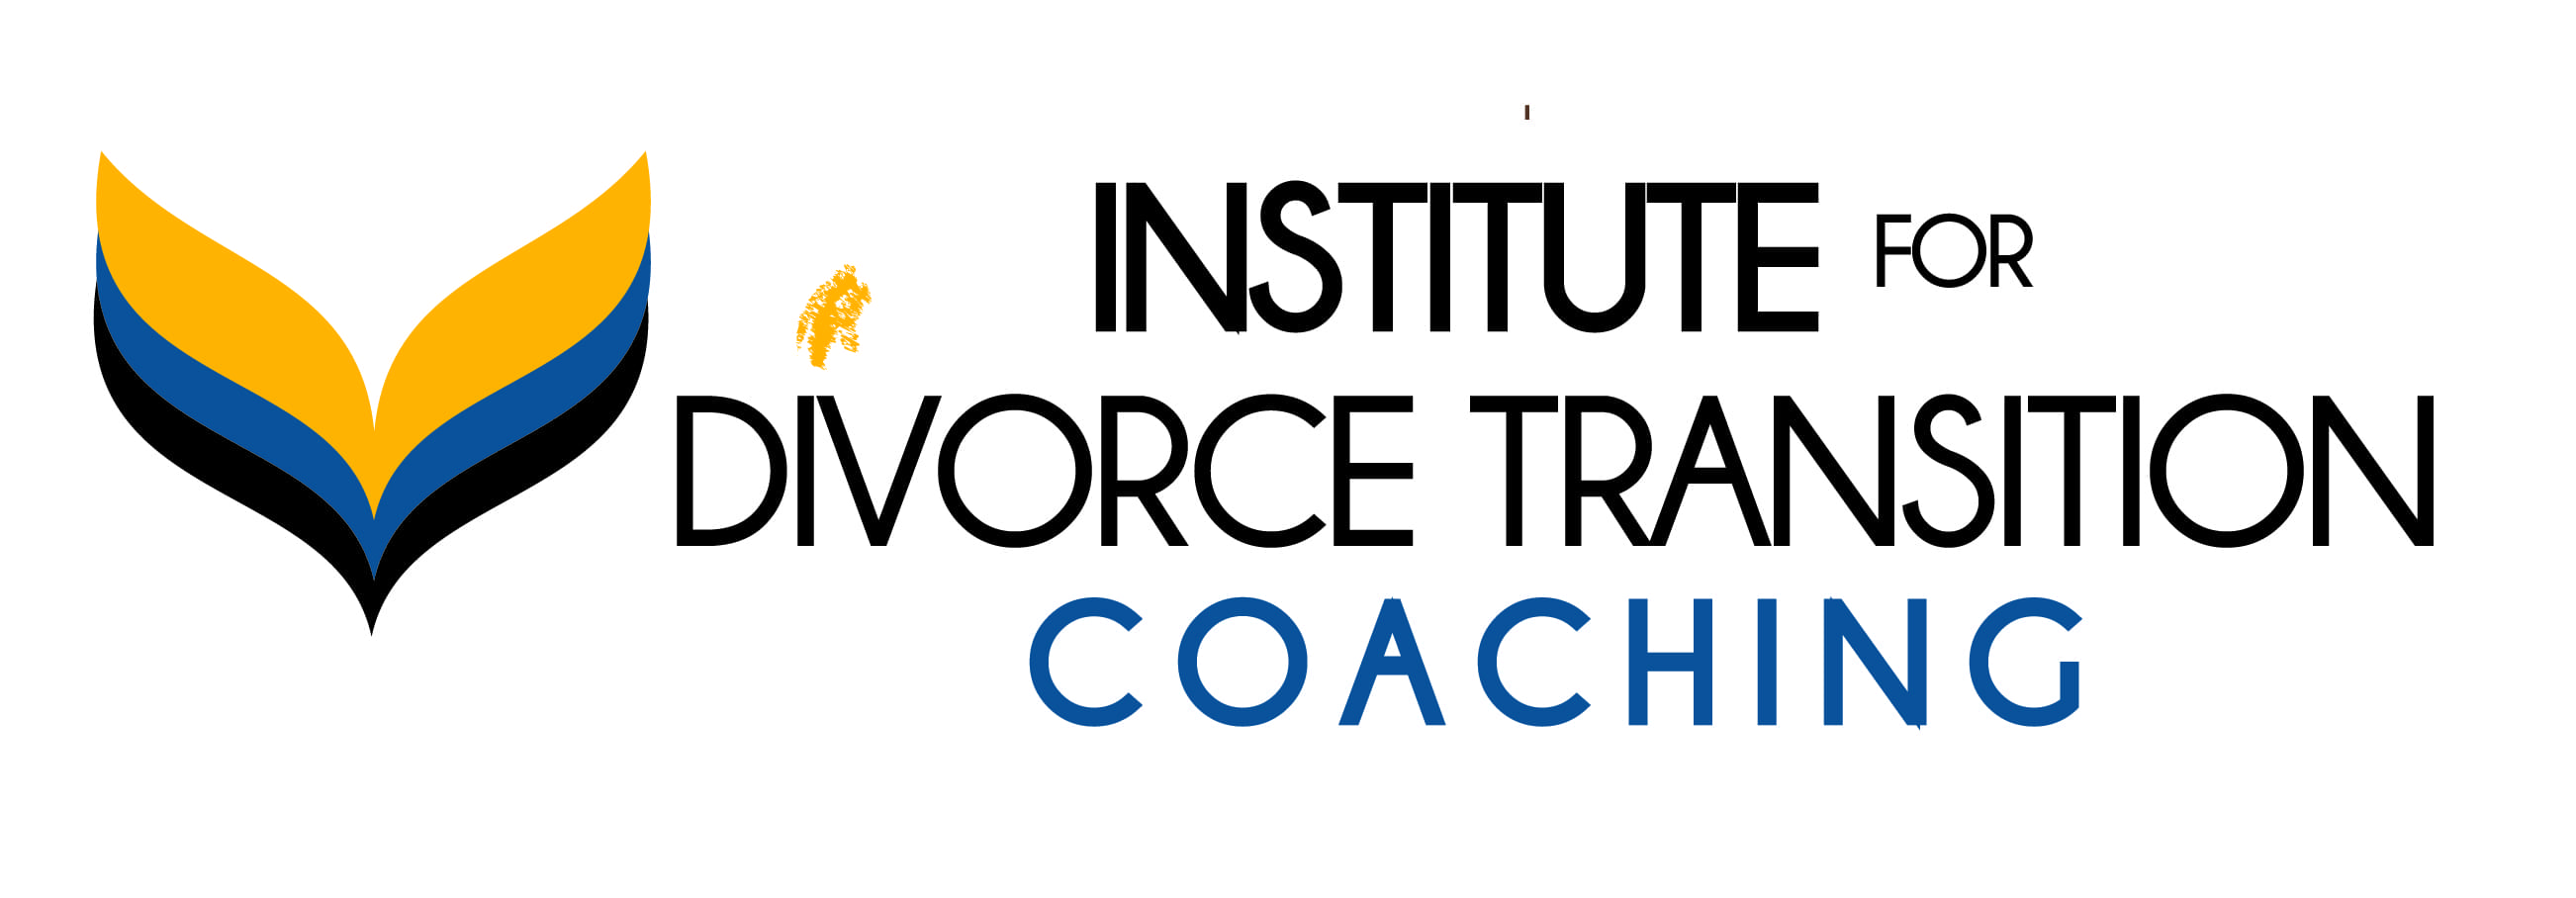 Institute for Divorce Transition Coaching Logo